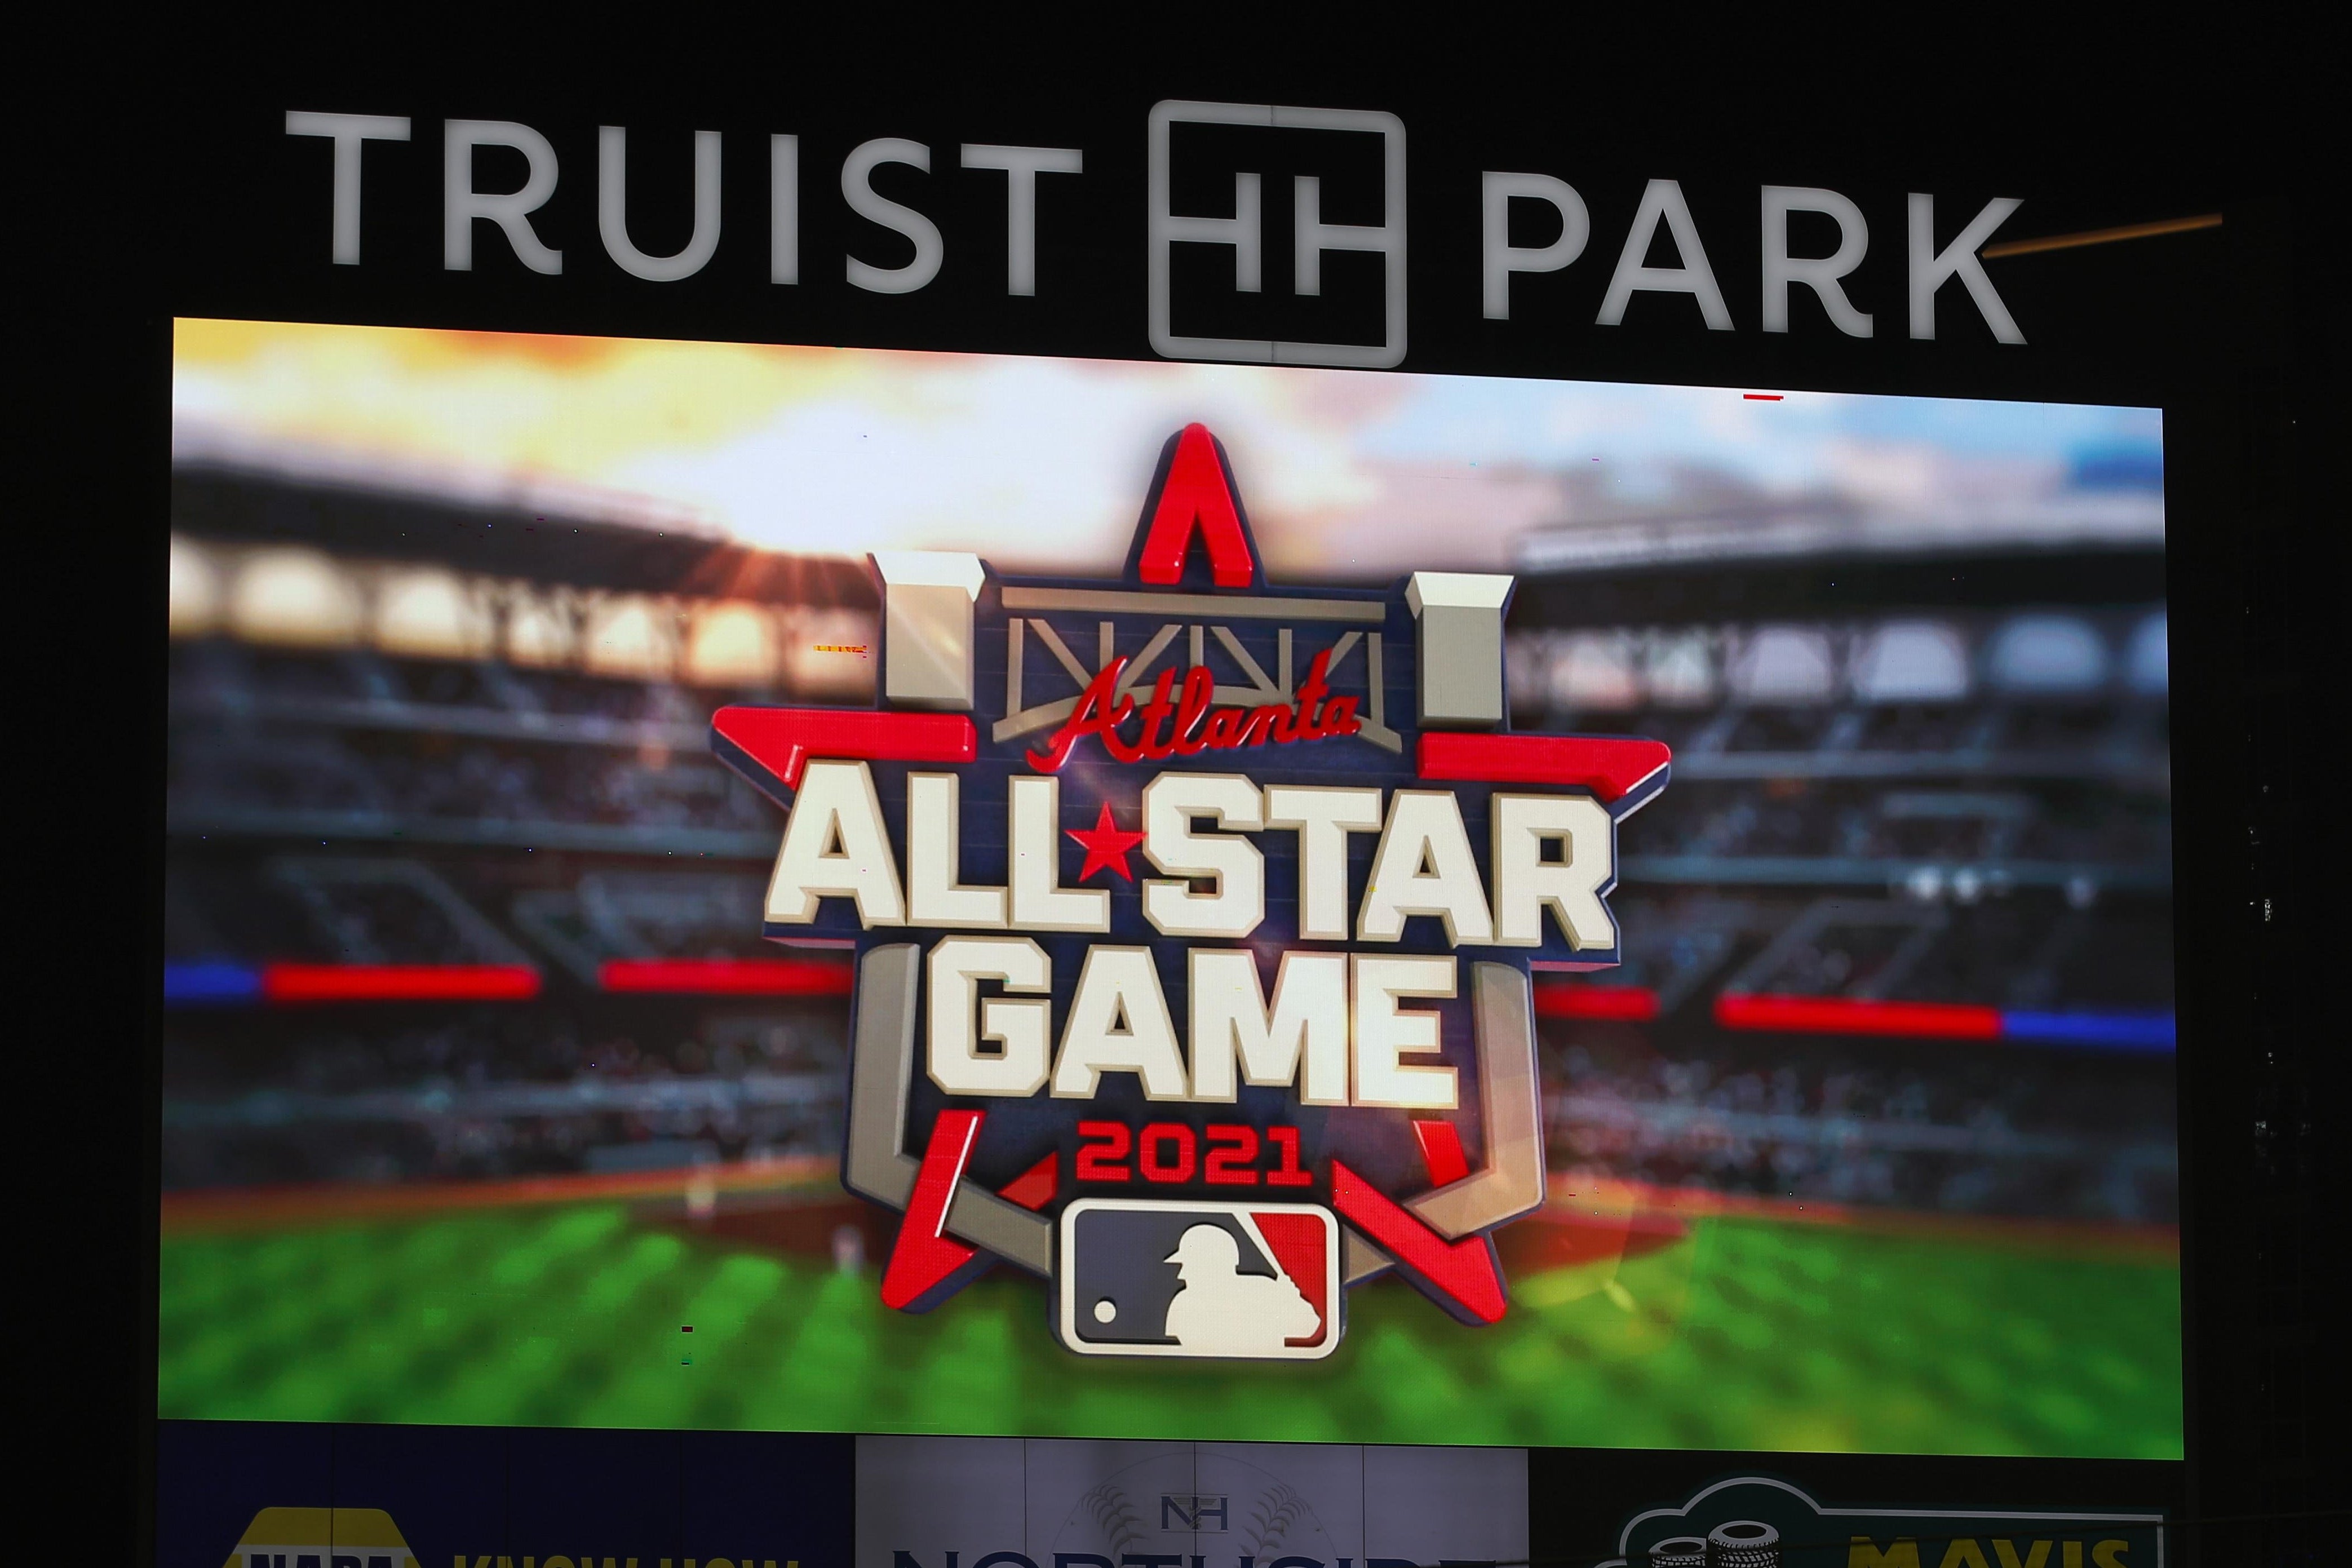 The 2021 All Star Game Logo is displayed on a jumbotron in Atlanta's Truist Park